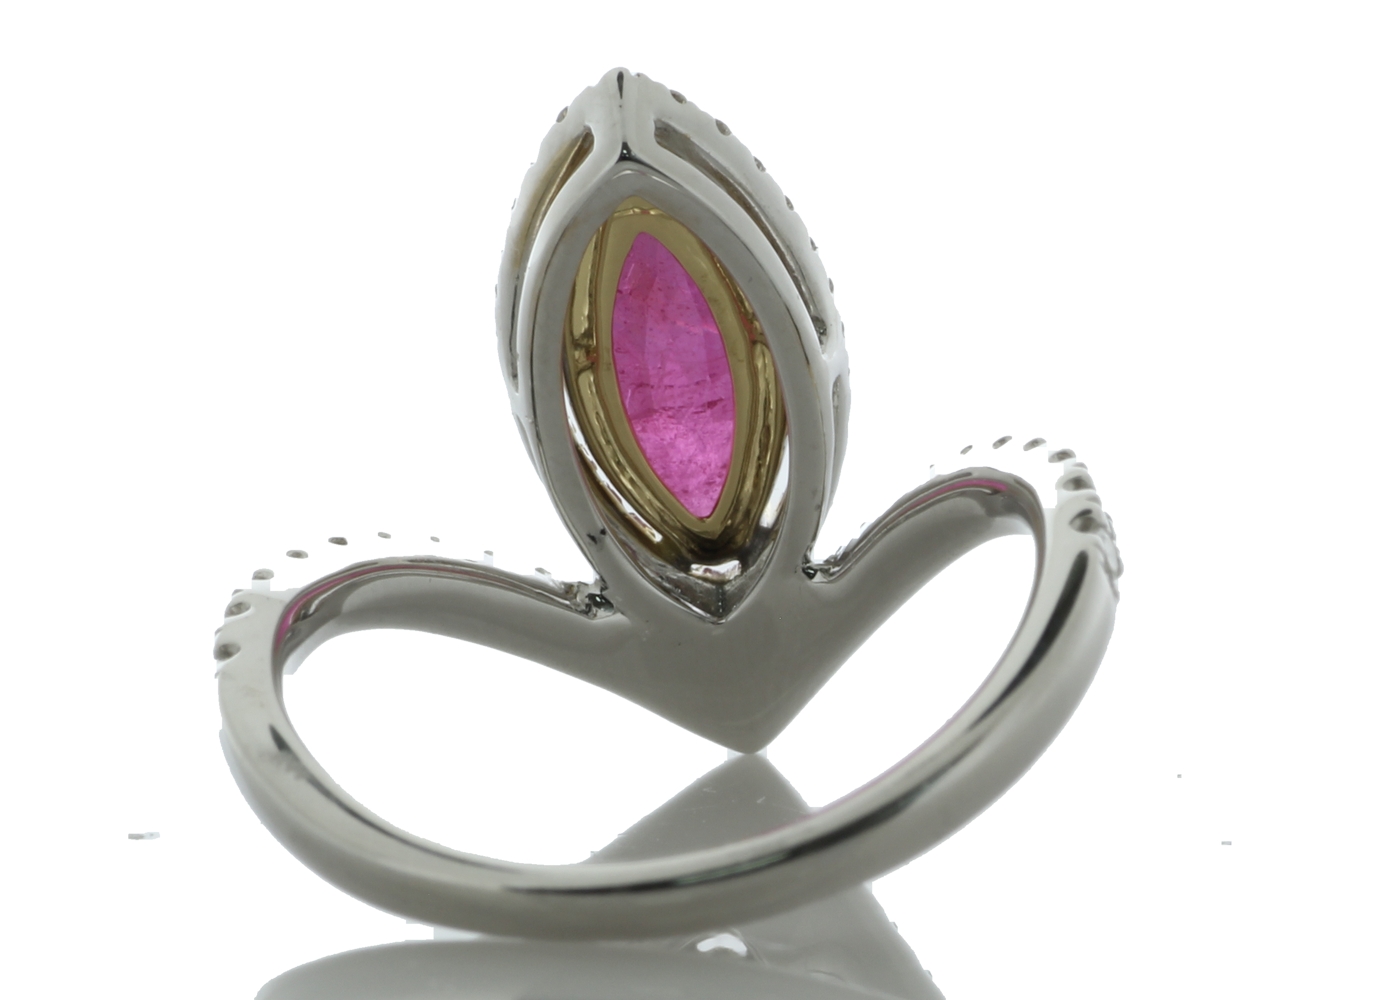 18ct White Gold Marquise Cut Ruby and Diamond Ring (R2.11) 0.47 Carats - Image 4 of 6